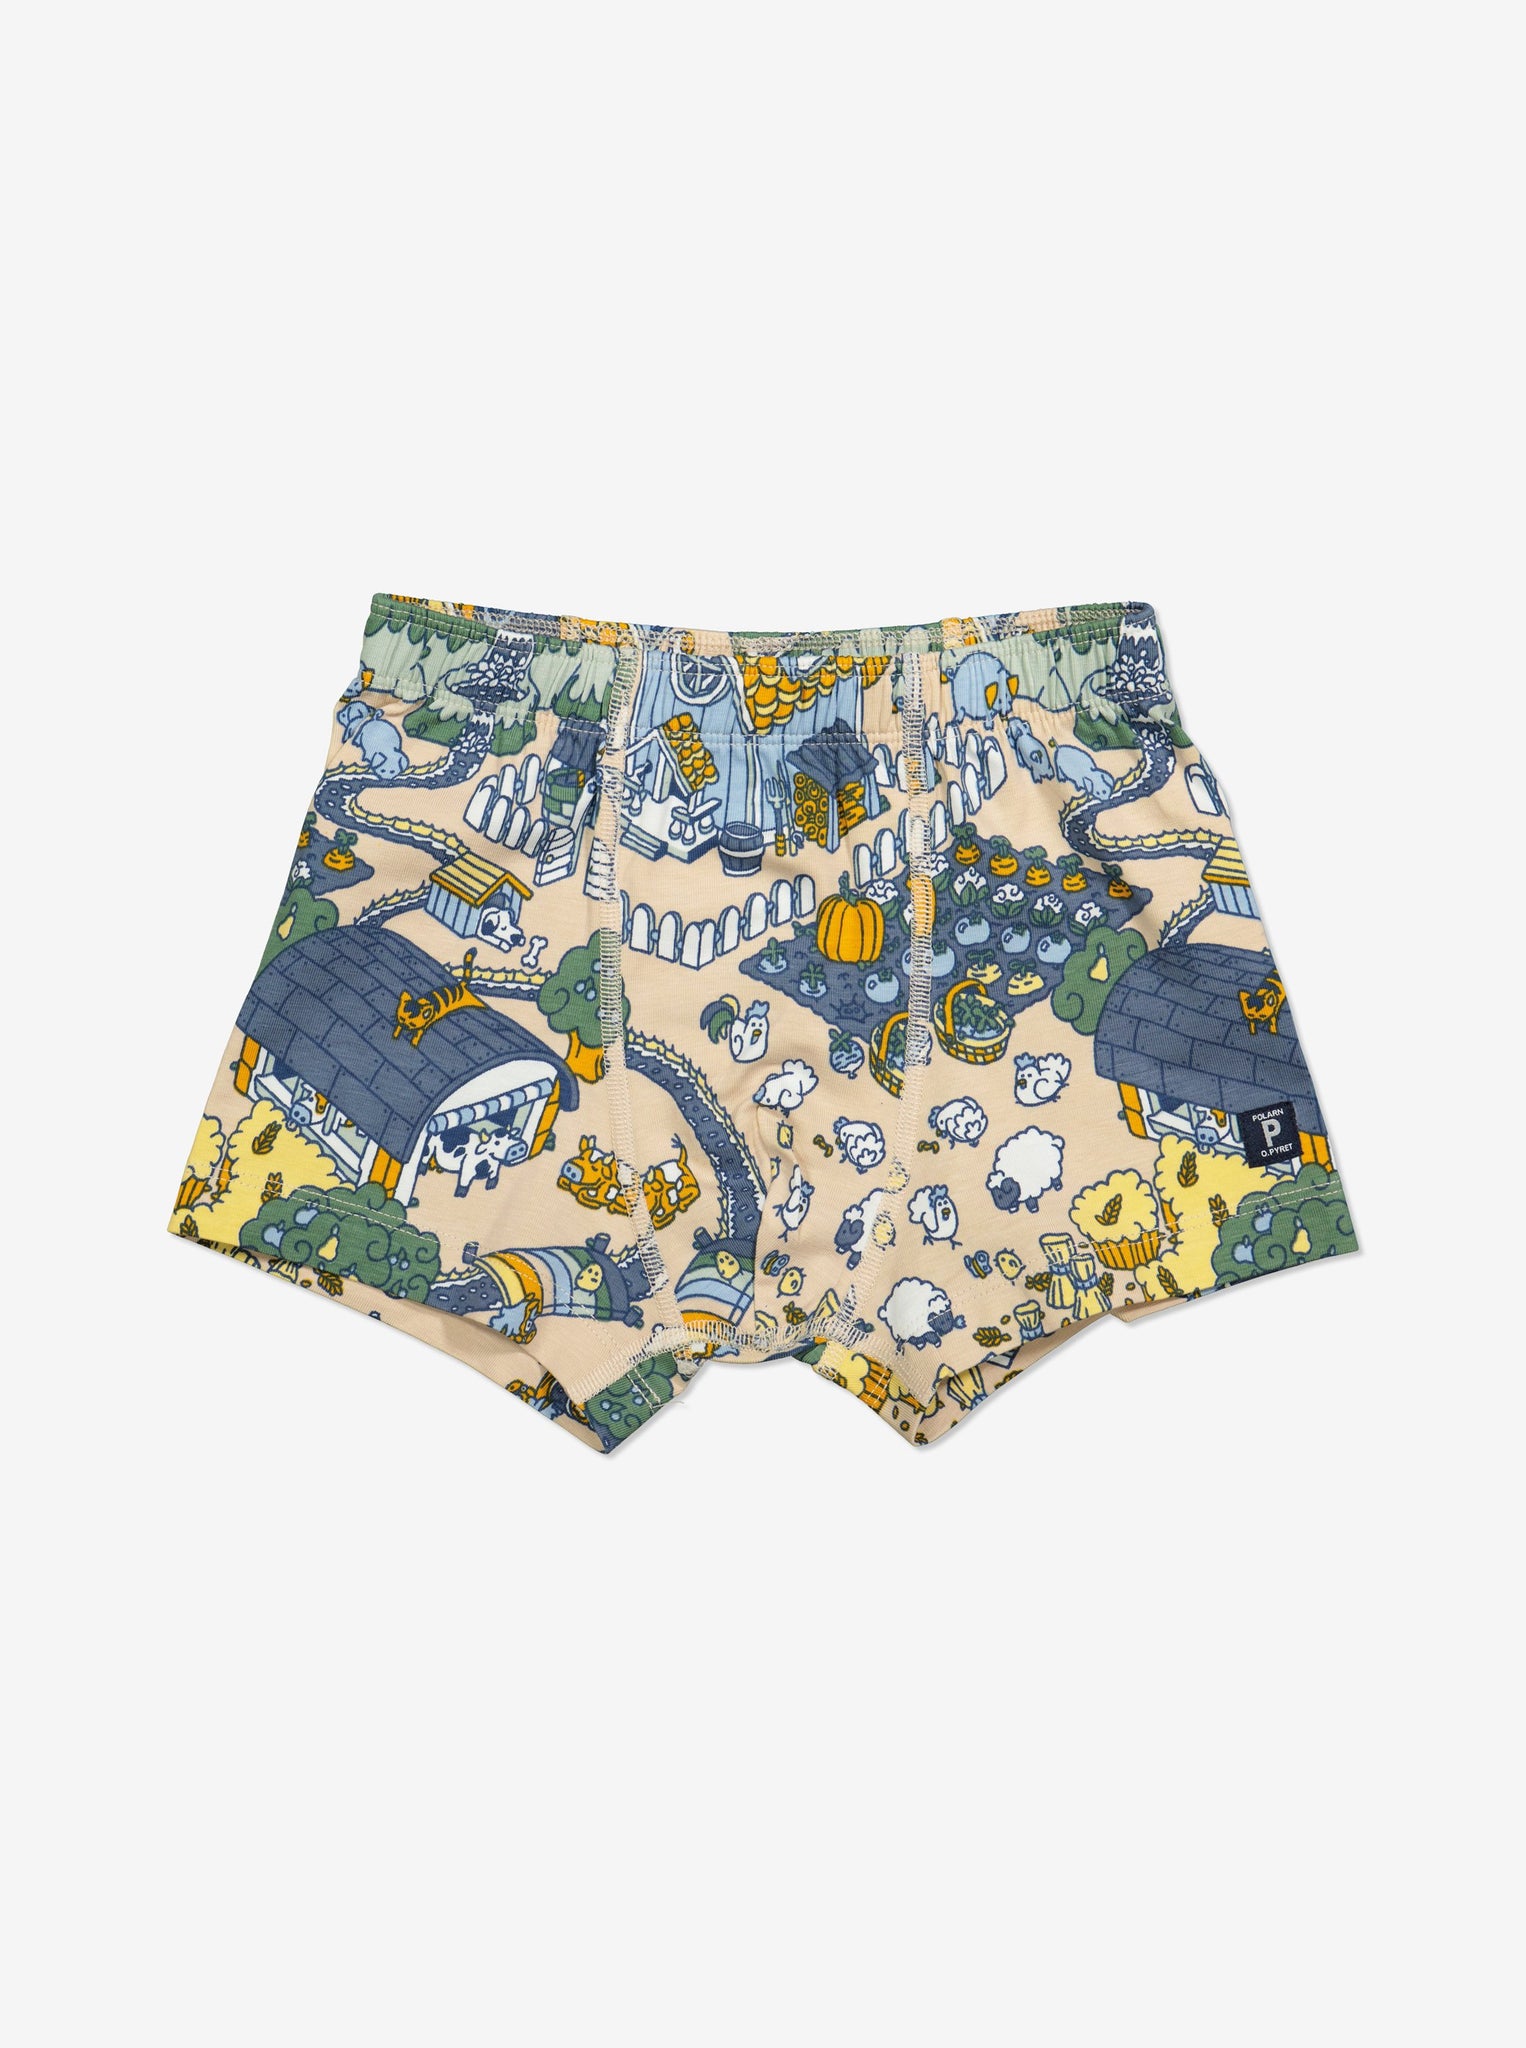  Organic Blue Boys Boxer Shorts from Polarn O. Pyret Kidswear. Made from sustainable materials.